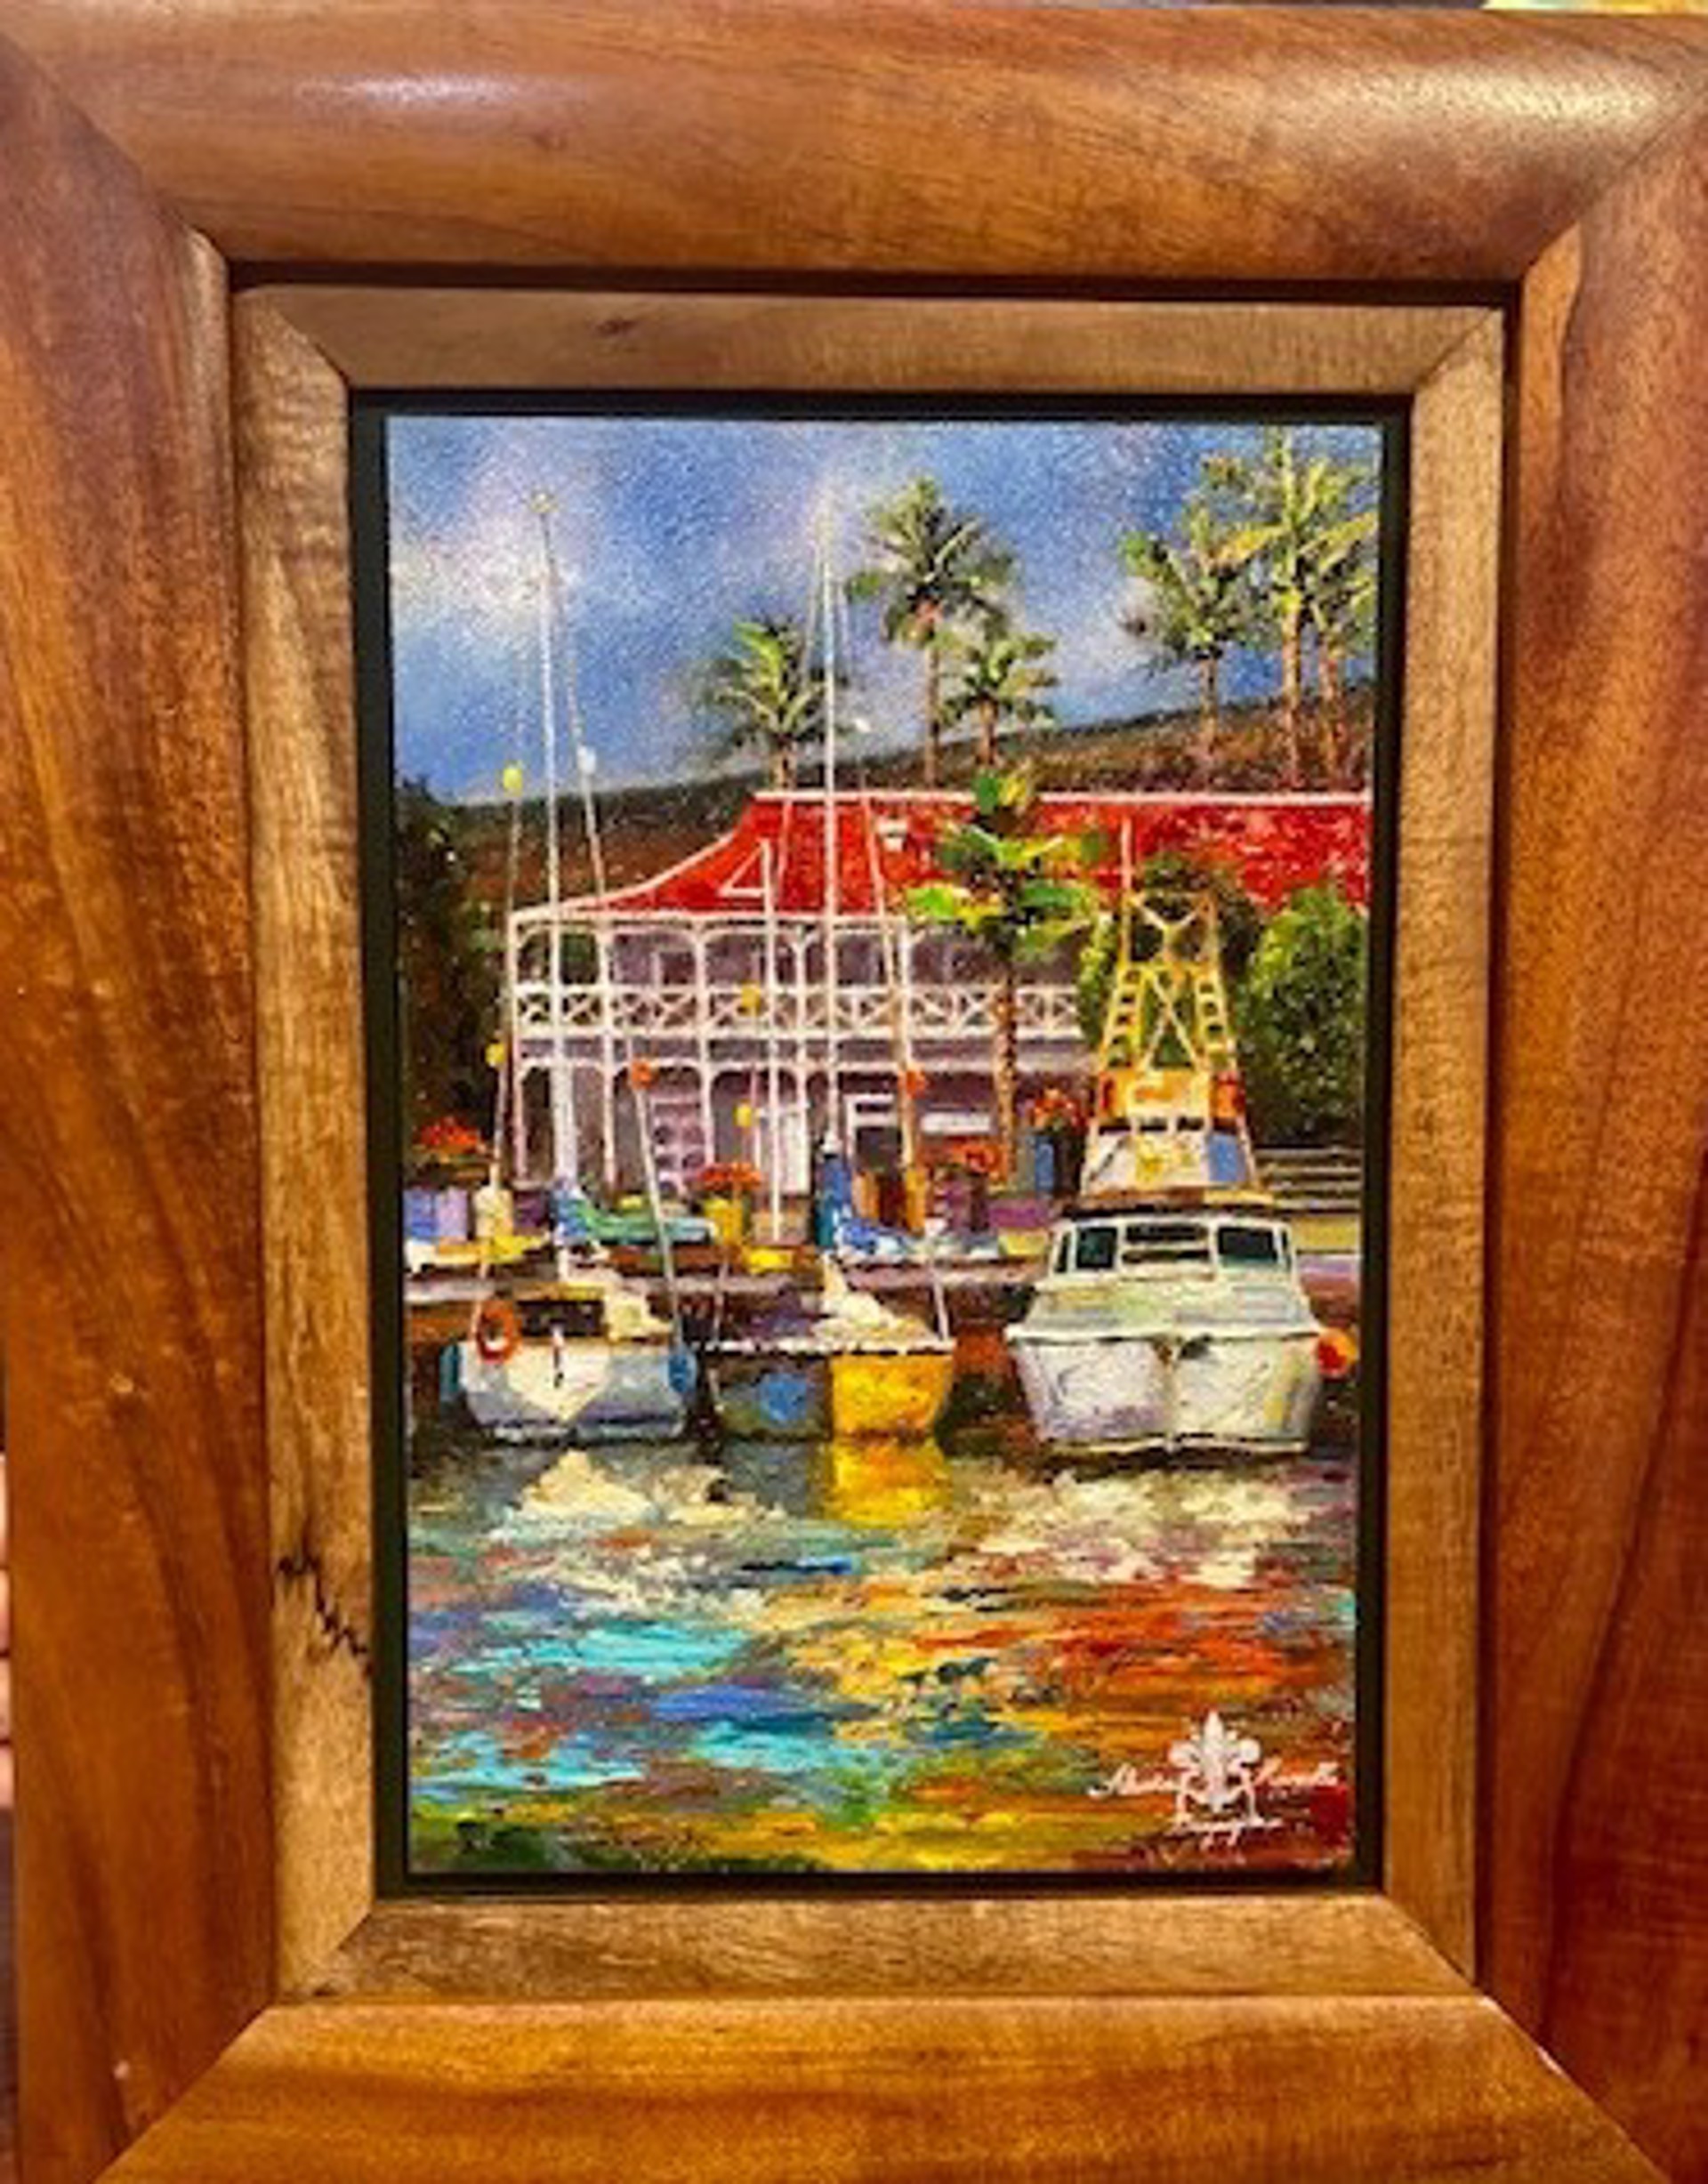 Lahaina Harbor Study 4 by The Twins